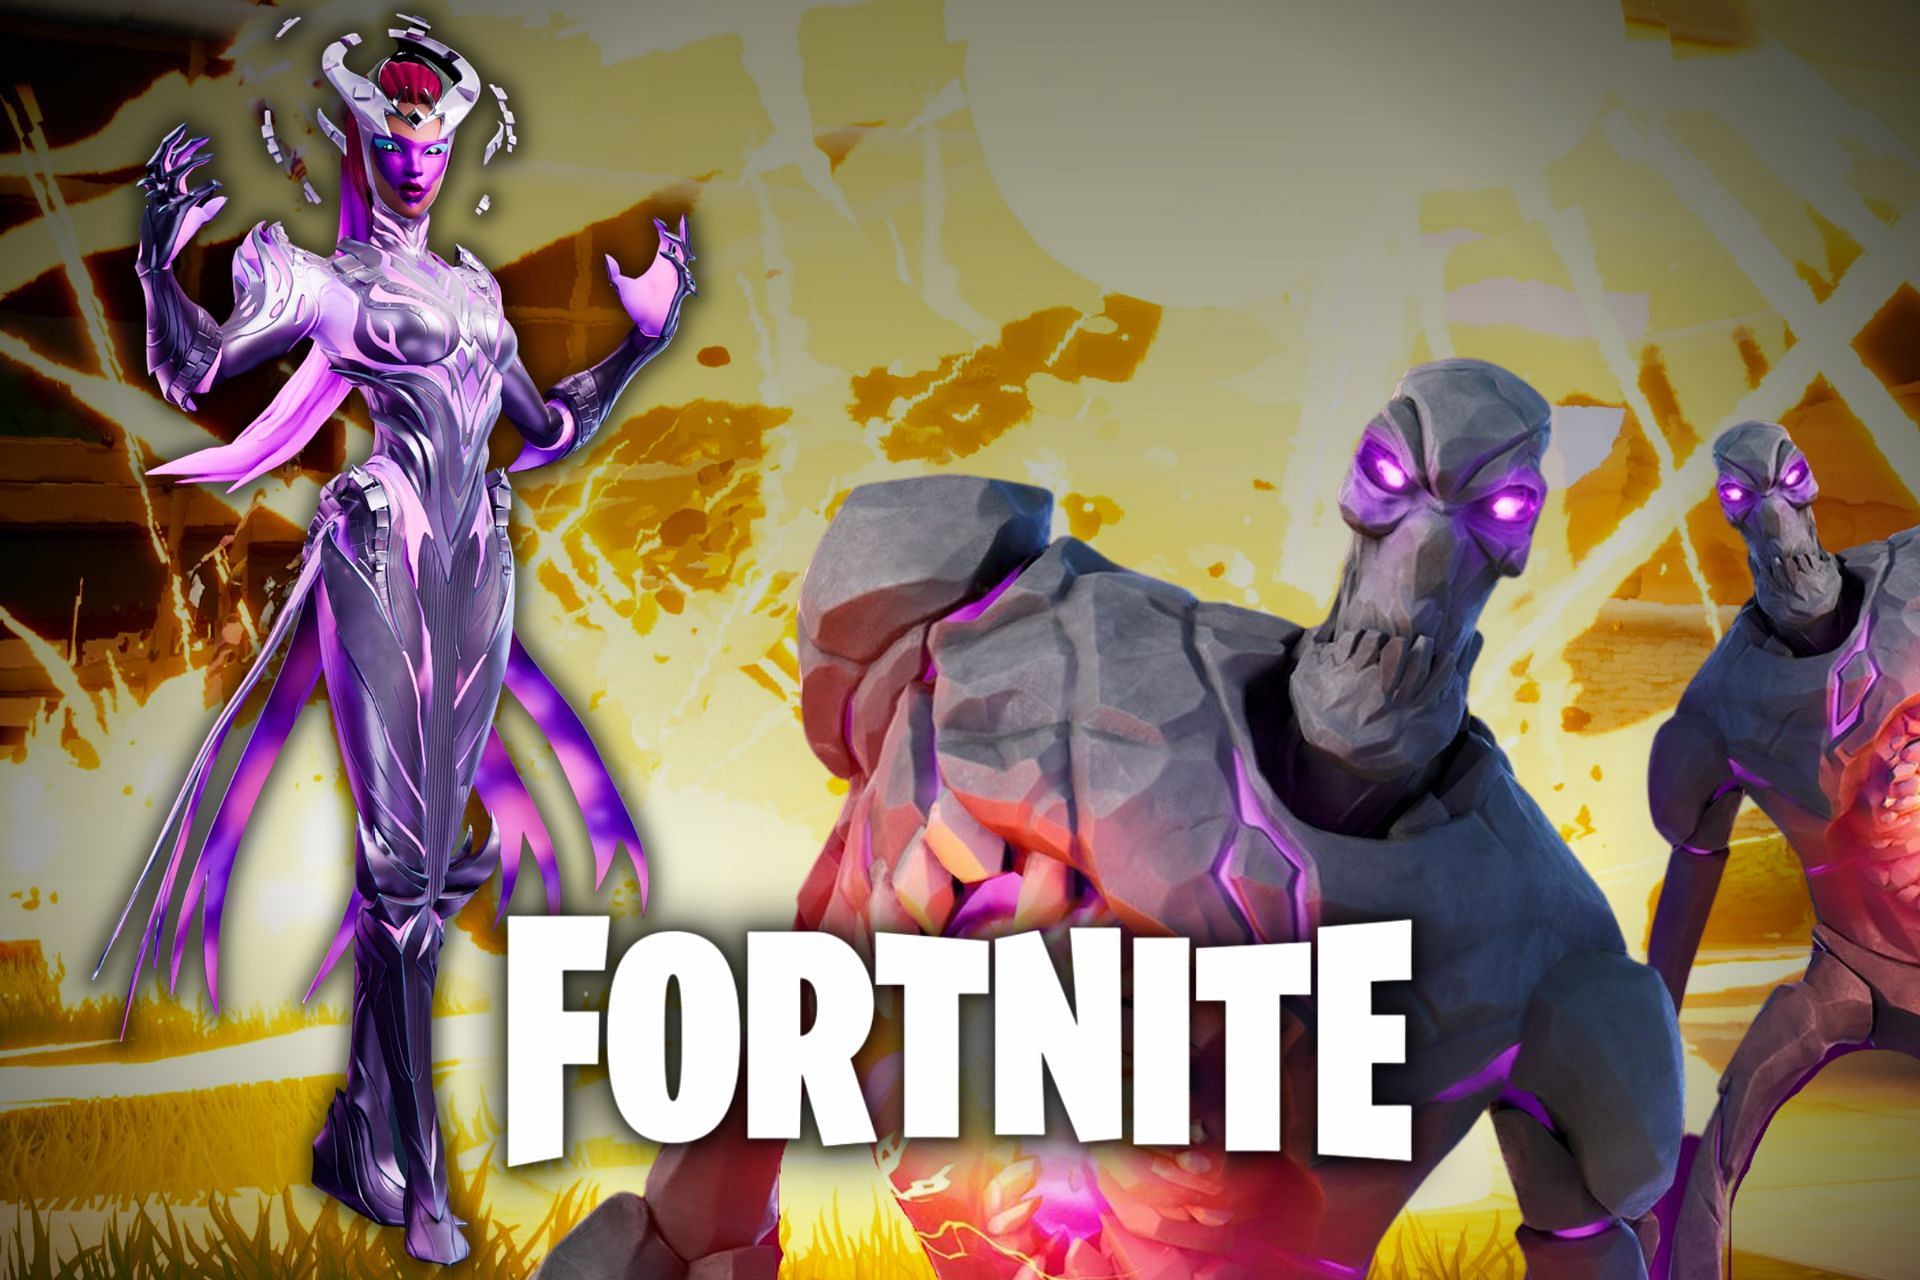 The Cube Queen has arrived on the Fortnite island and aims to destroy it completely (Image via Sportskeeda)